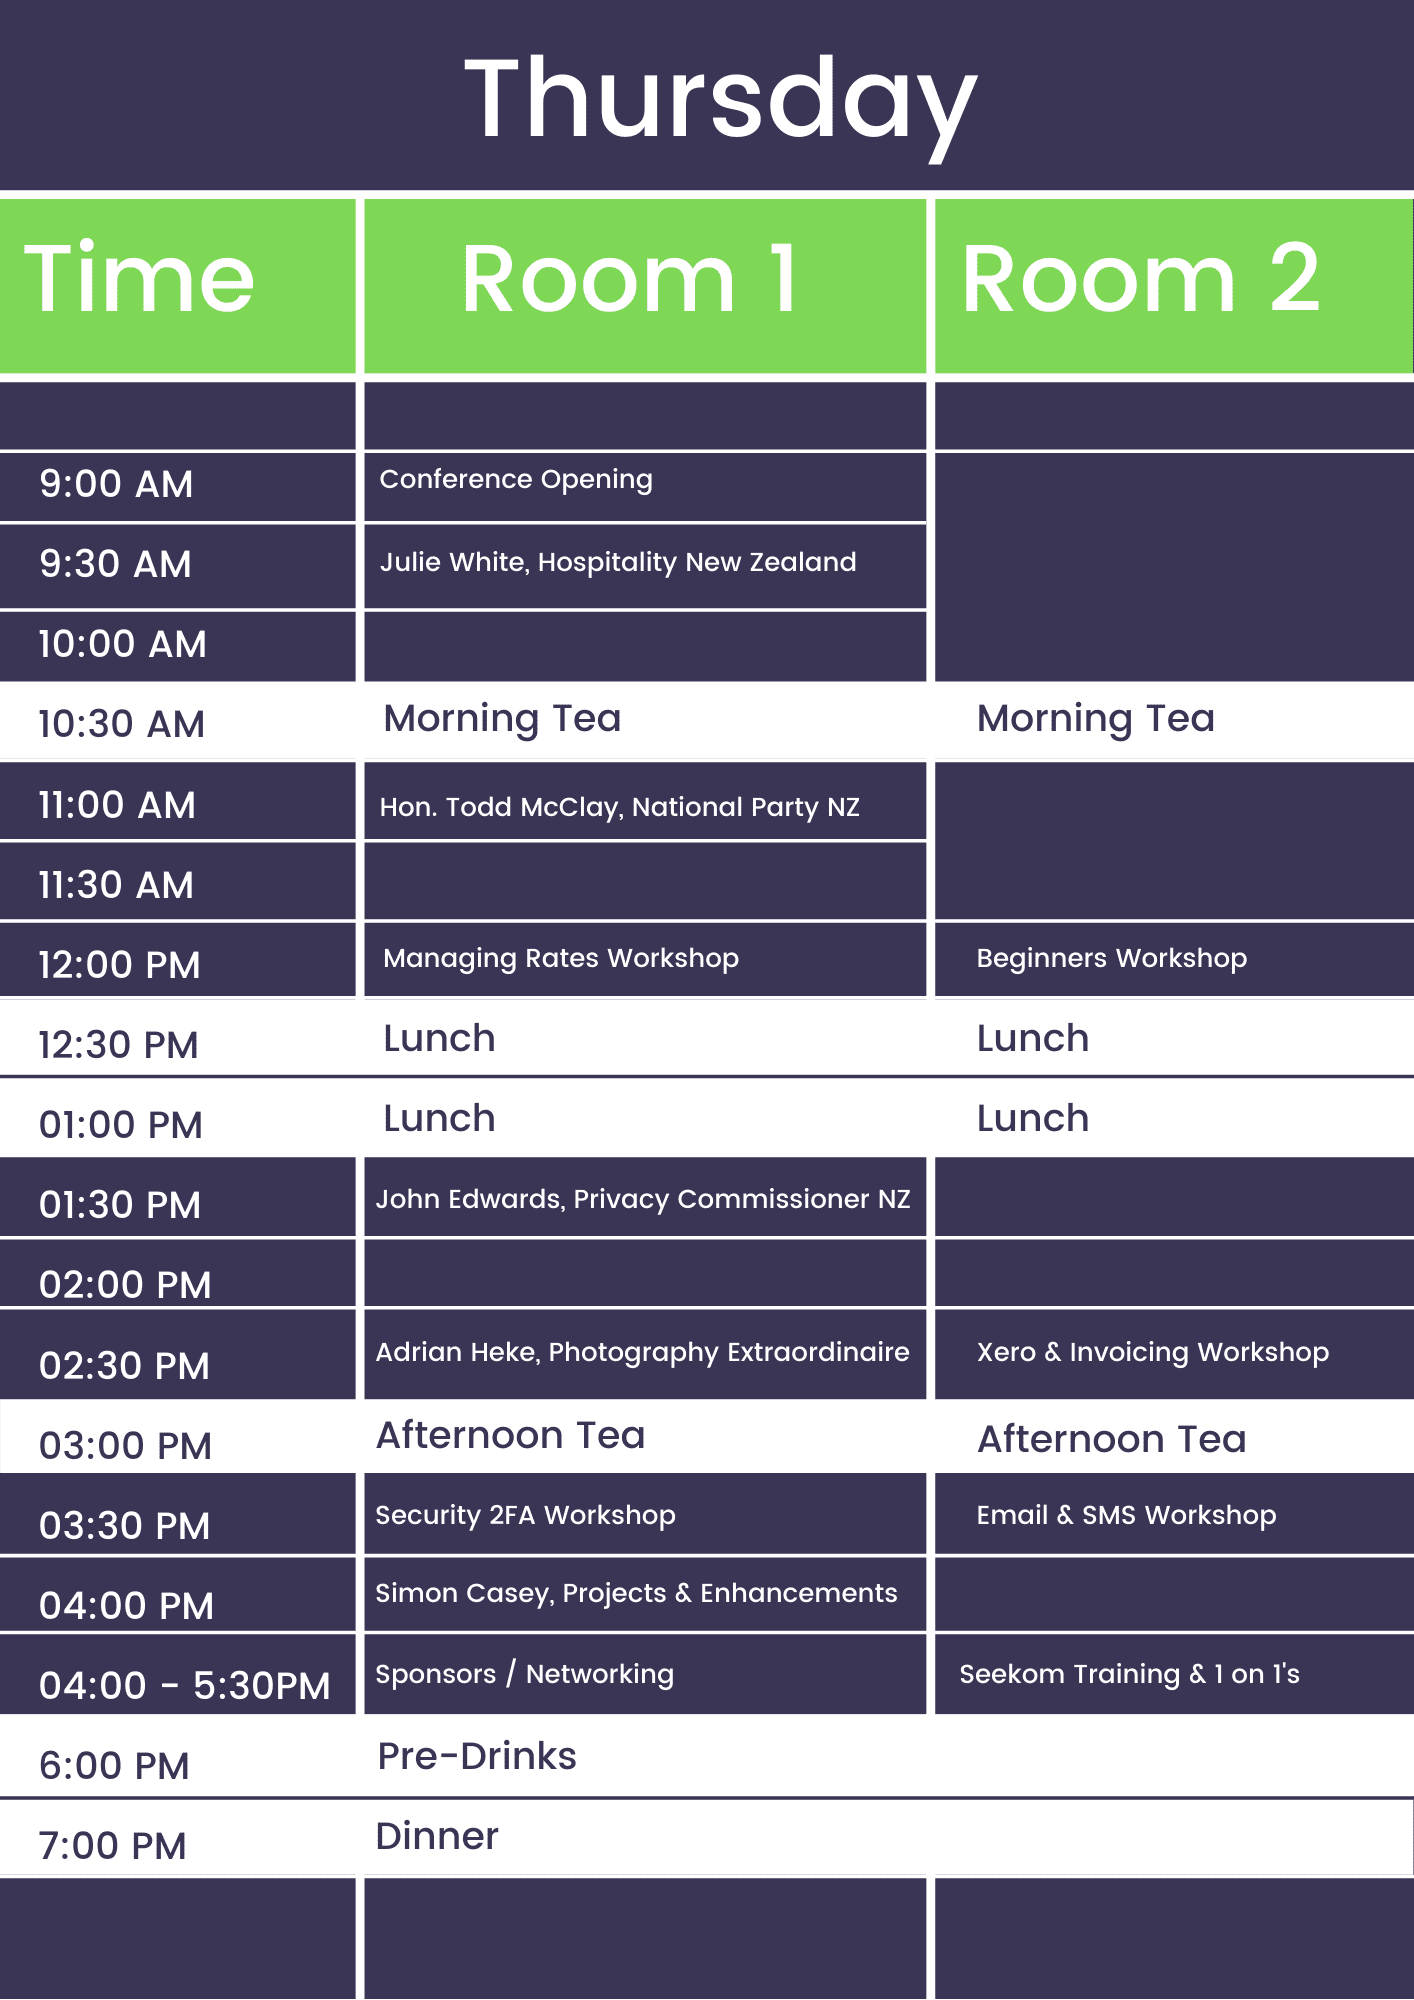 2021 Seekom Conference Thursday Timetable